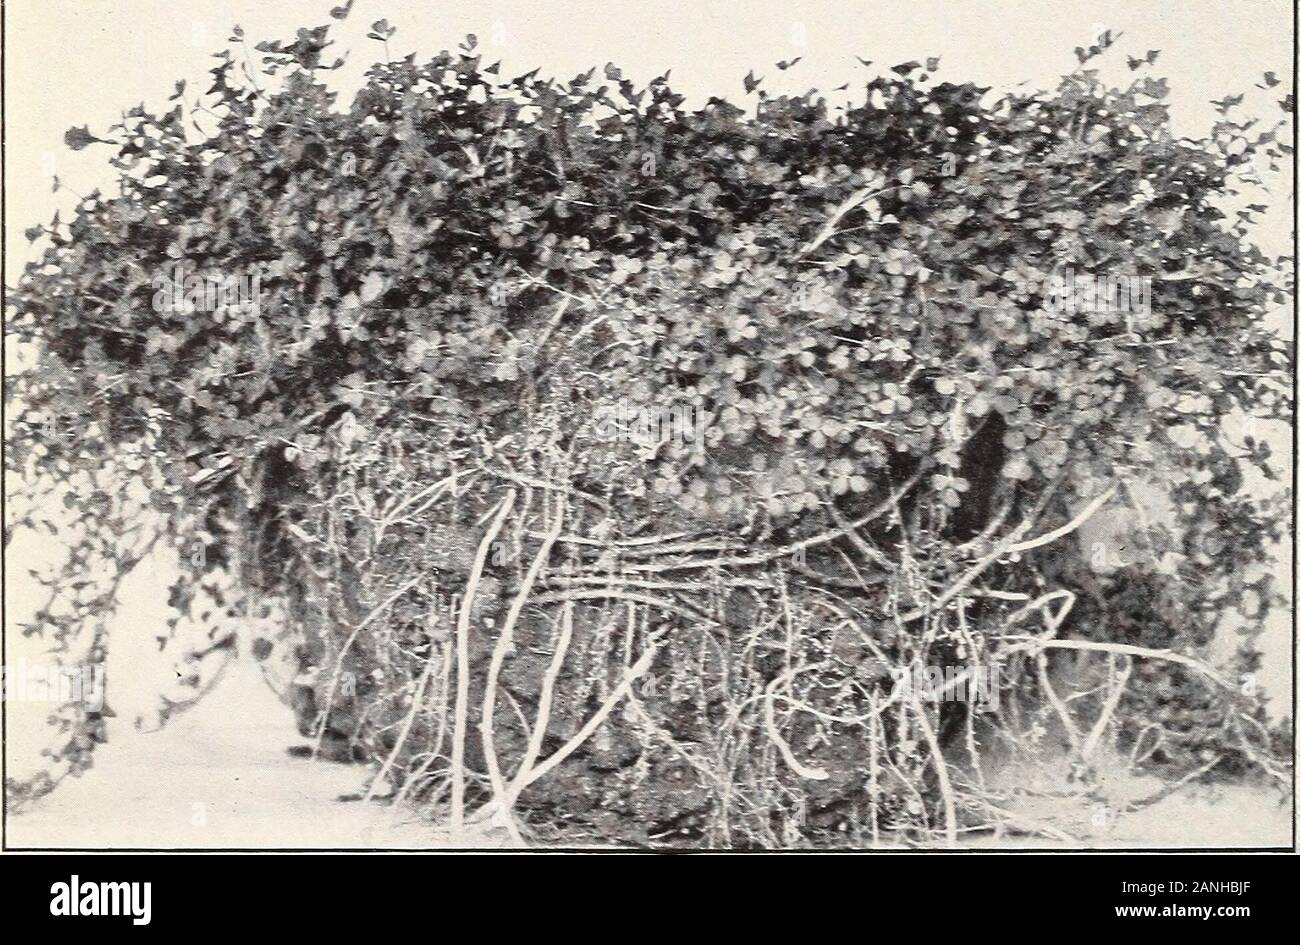 Some new alfalfa varieties for pastures . Fig 1.—A Plant of Cross No. 336, Showing Recovery After a Severe Cutting Test. fS&mr*ixJSL**. Fig. 2.—A Plant of Medicago falcata S. P. I. No. 26667 ?, the Seed-BearingParent of Cross No. 336. 258, Bureau of Plant Industry, U. S. Dept. of Agriculture. Plate V. Stock Photo